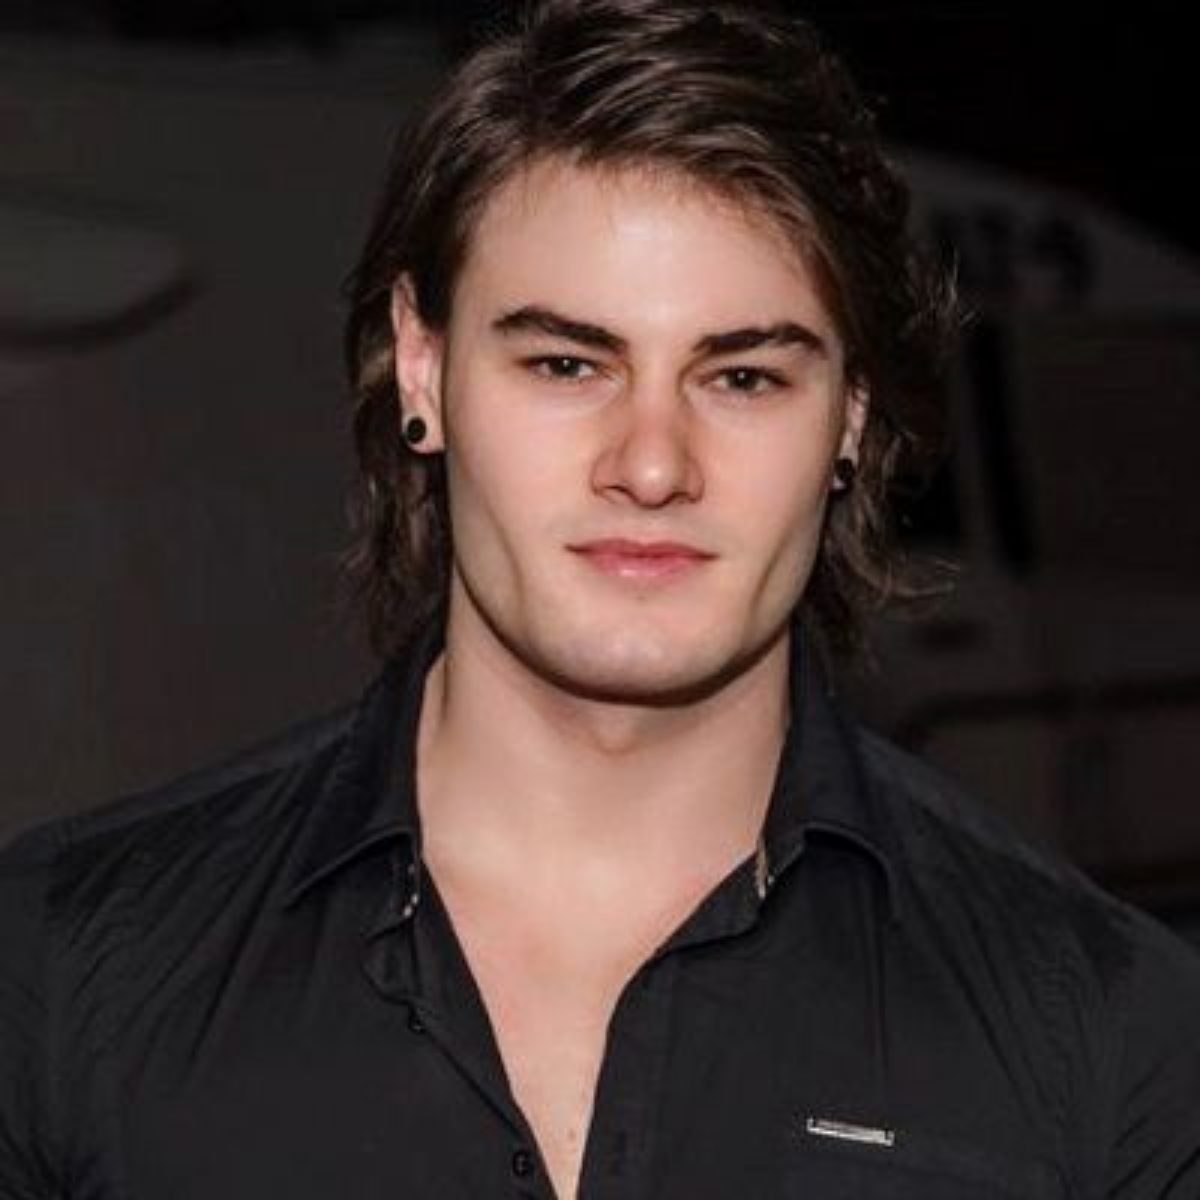 Jeff Seid - Bio, Age, Net Worth, Height, Married, Nationality, Facts